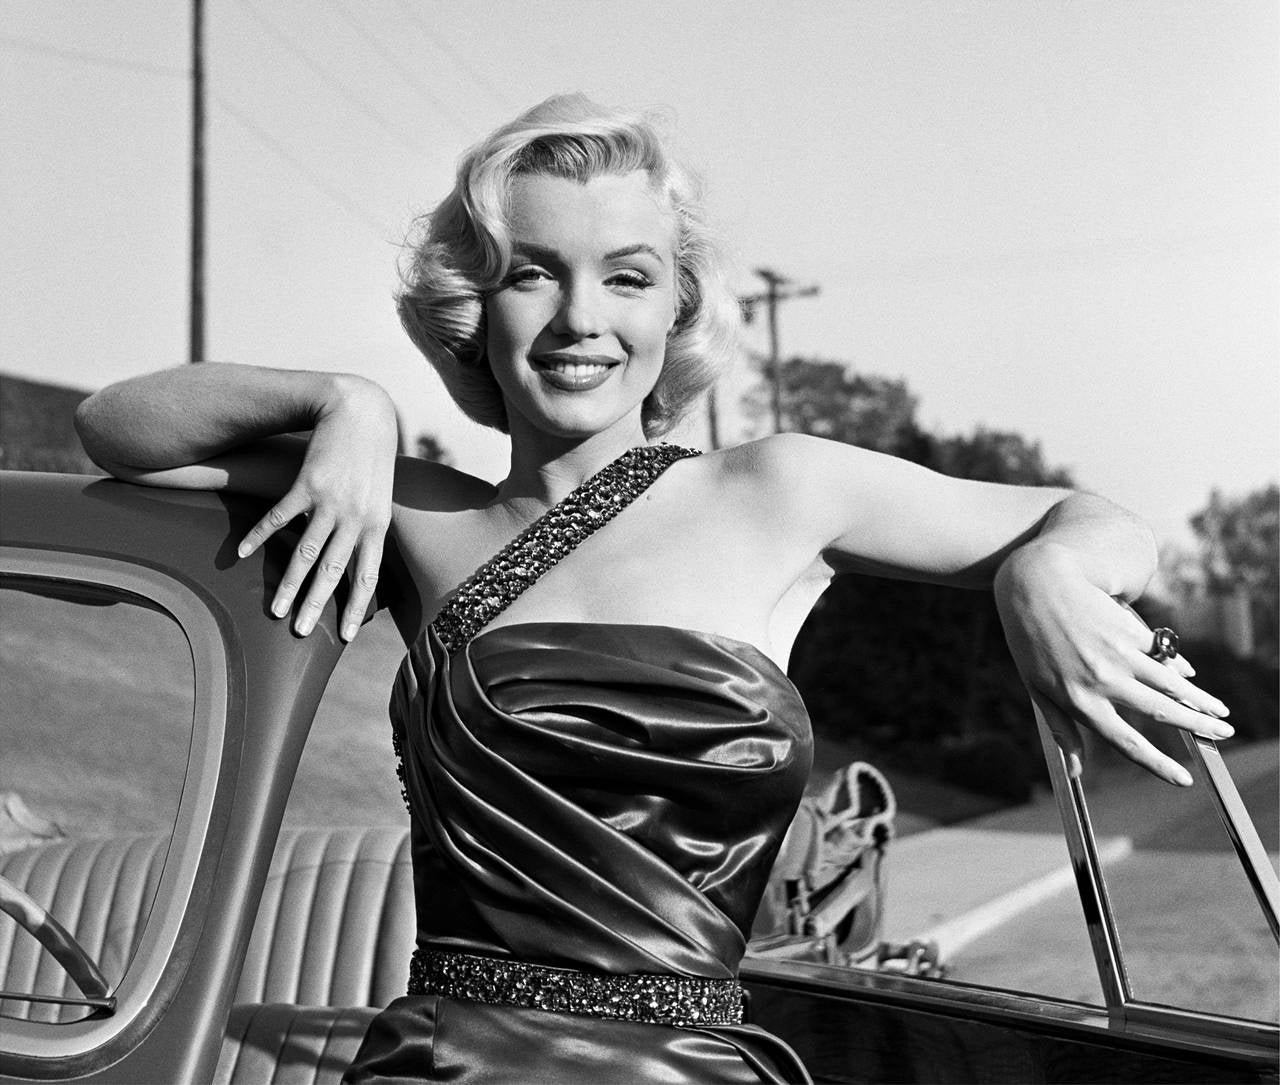 Frank Worth Portrait Photograph - Marilyn Monroe Classic Portrait on the Set of "How to Marry a Millionaire"